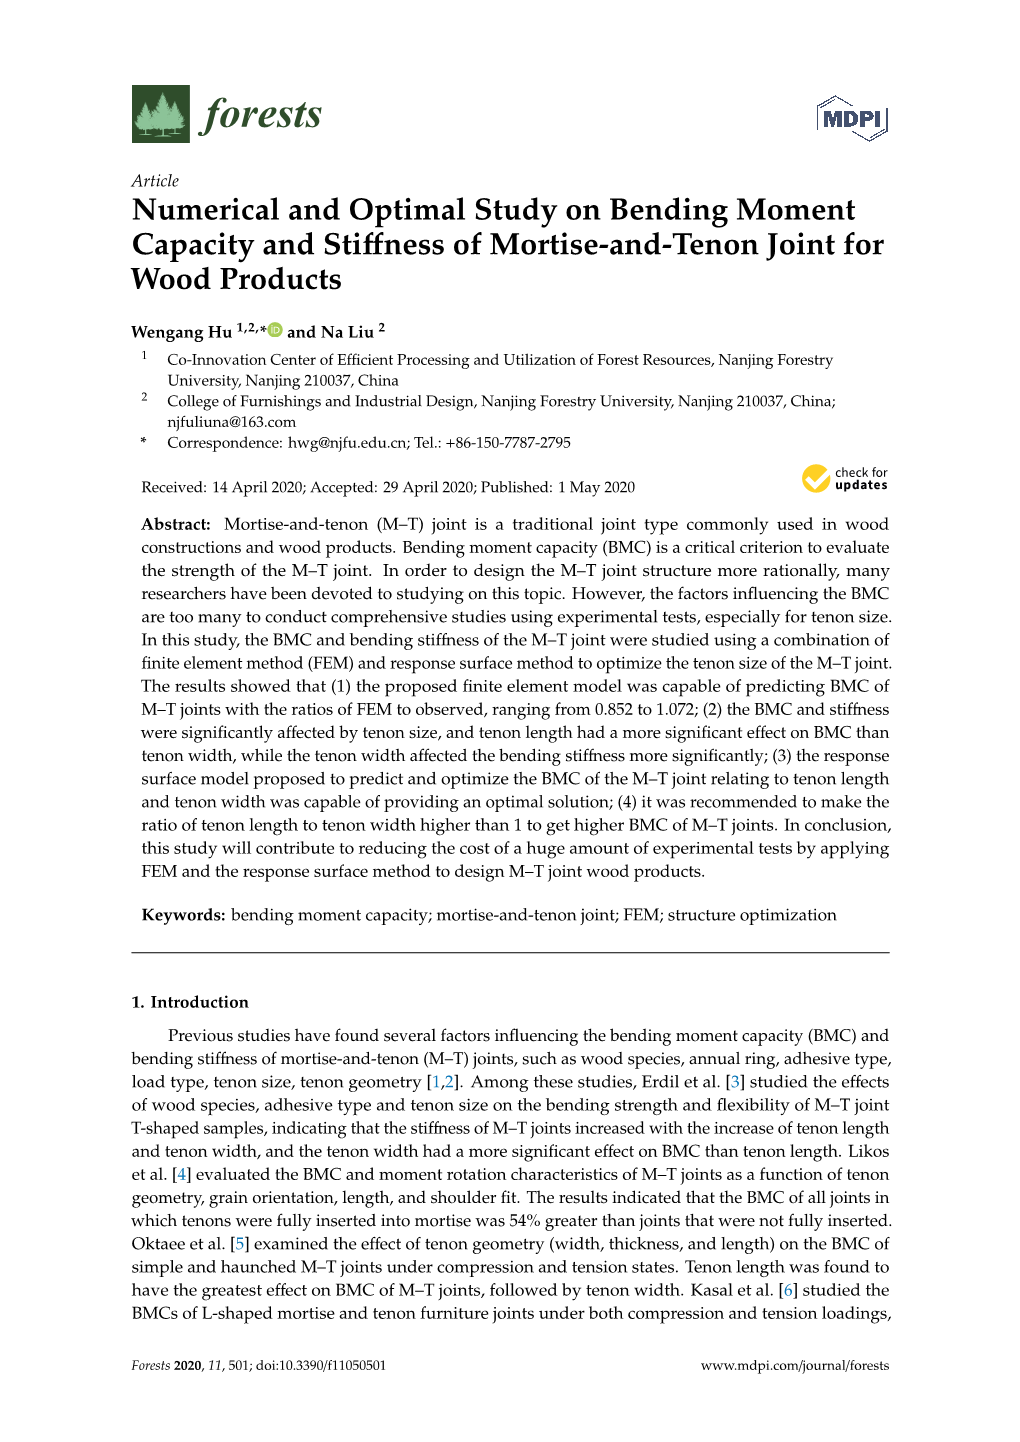 Numerical and Optimal Study on Bending Moment Capacity and Stiﬀness of Mortise-And-Tenon Joint for Wood Products